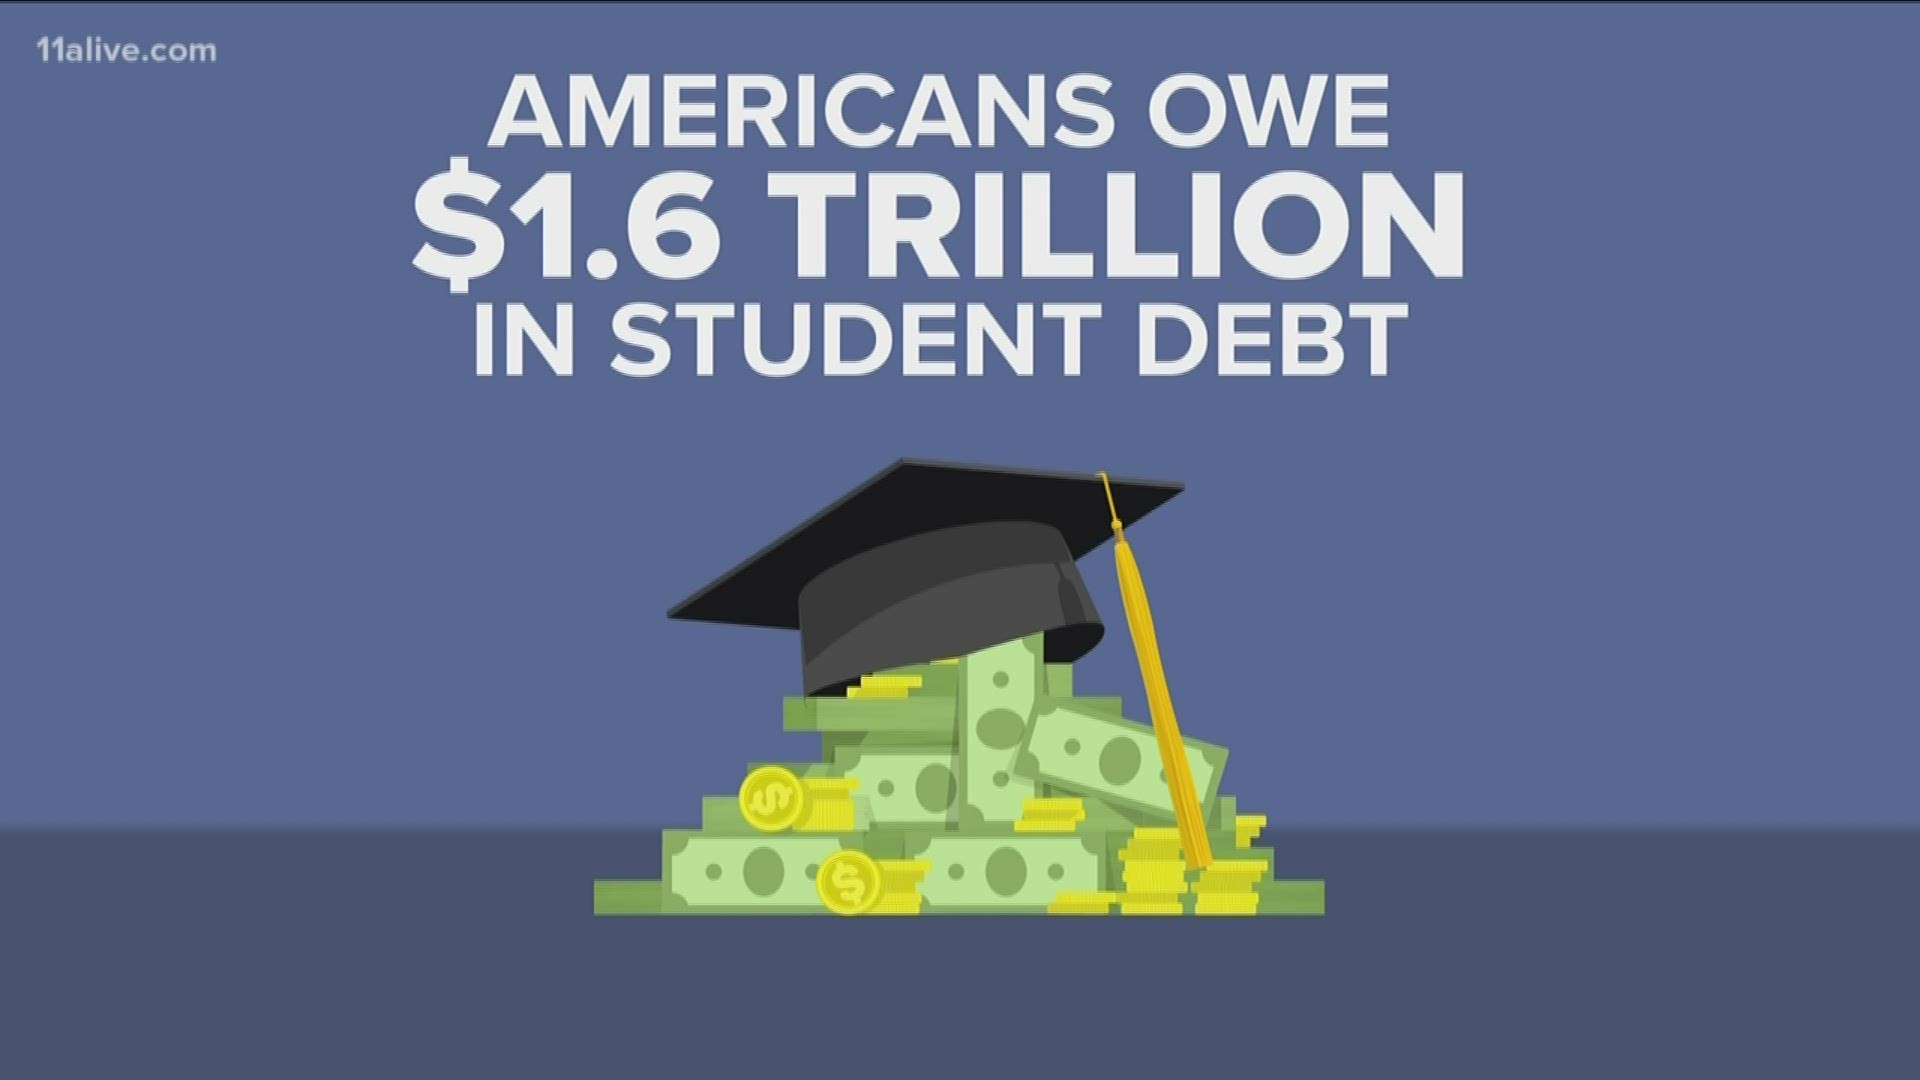 Forbes reports Americans ow $1.6 trillion in student debt.